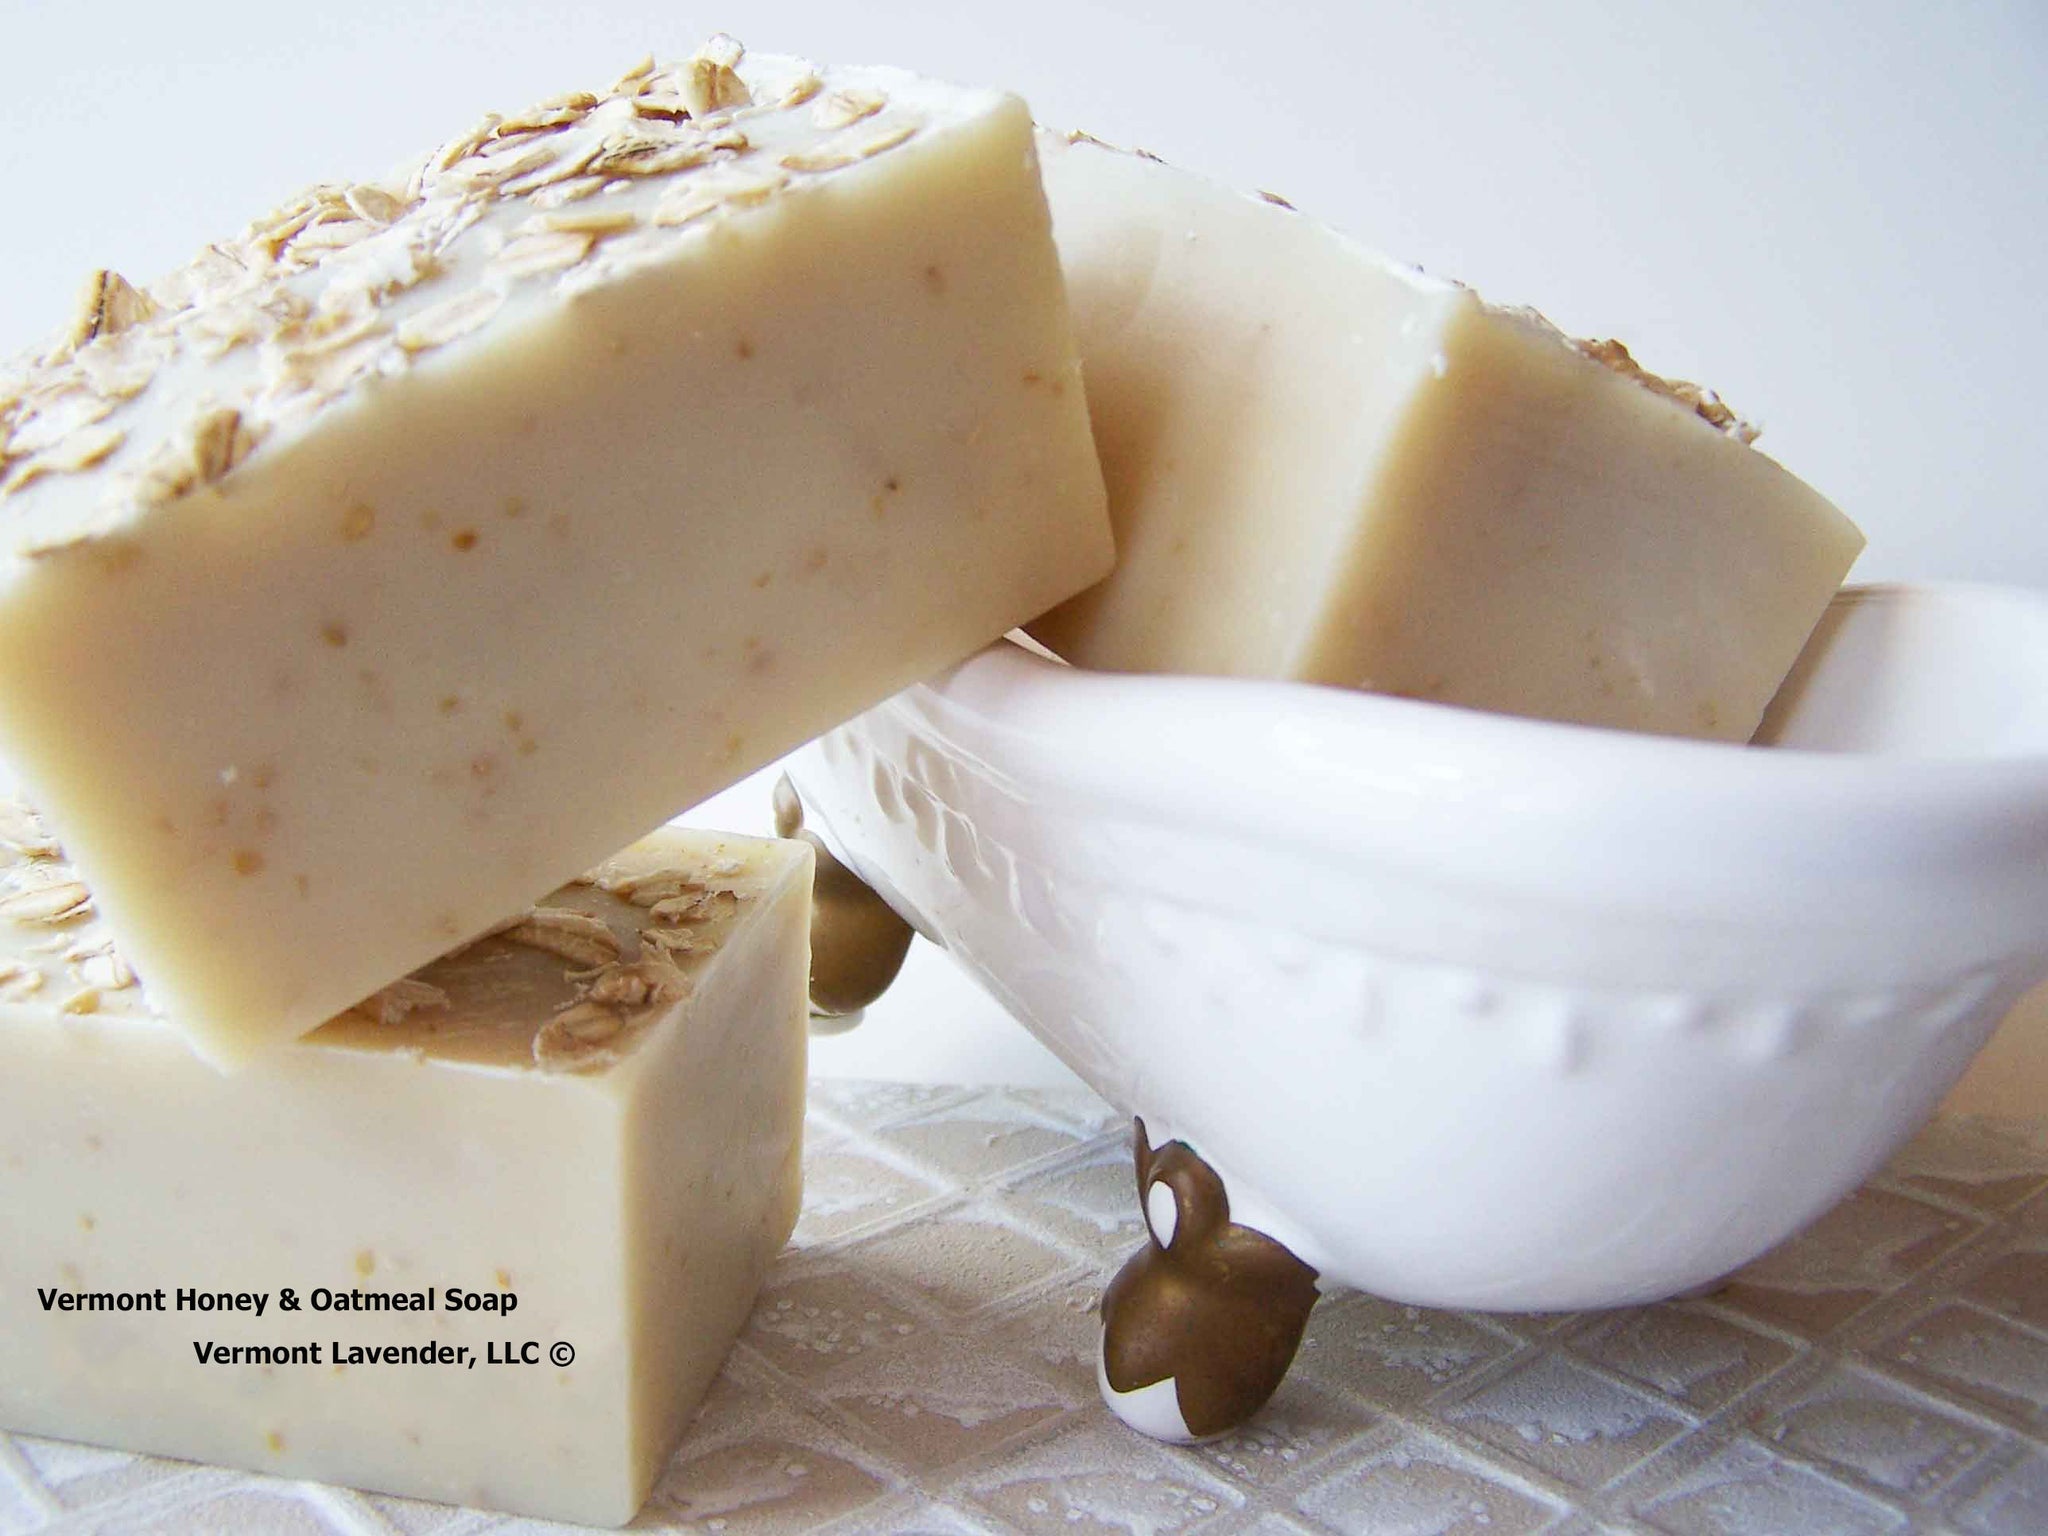 Vermont Honey and Oatmeal unscented soap for eczema and psoriasis are gentle moisturizing soaps made here in Barre, Vermont.